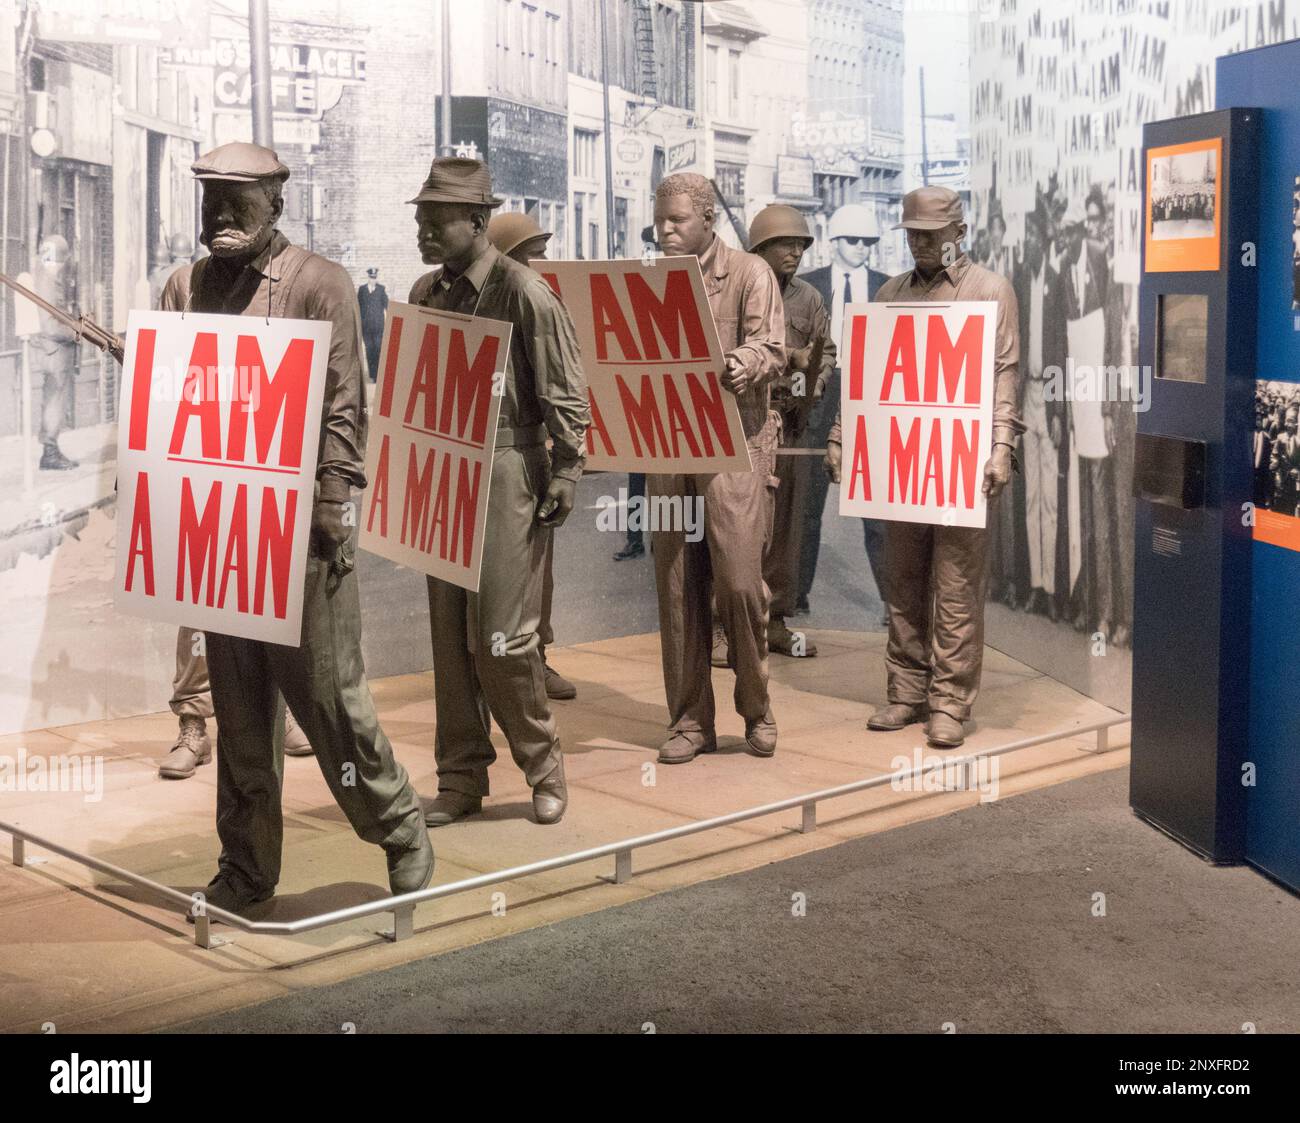 Interior of the National Civil Rights Museum, Lorraine Motel, Memphis, Tennessee, showing bronze sanitation workers with I Am a Man signs Stock Photo